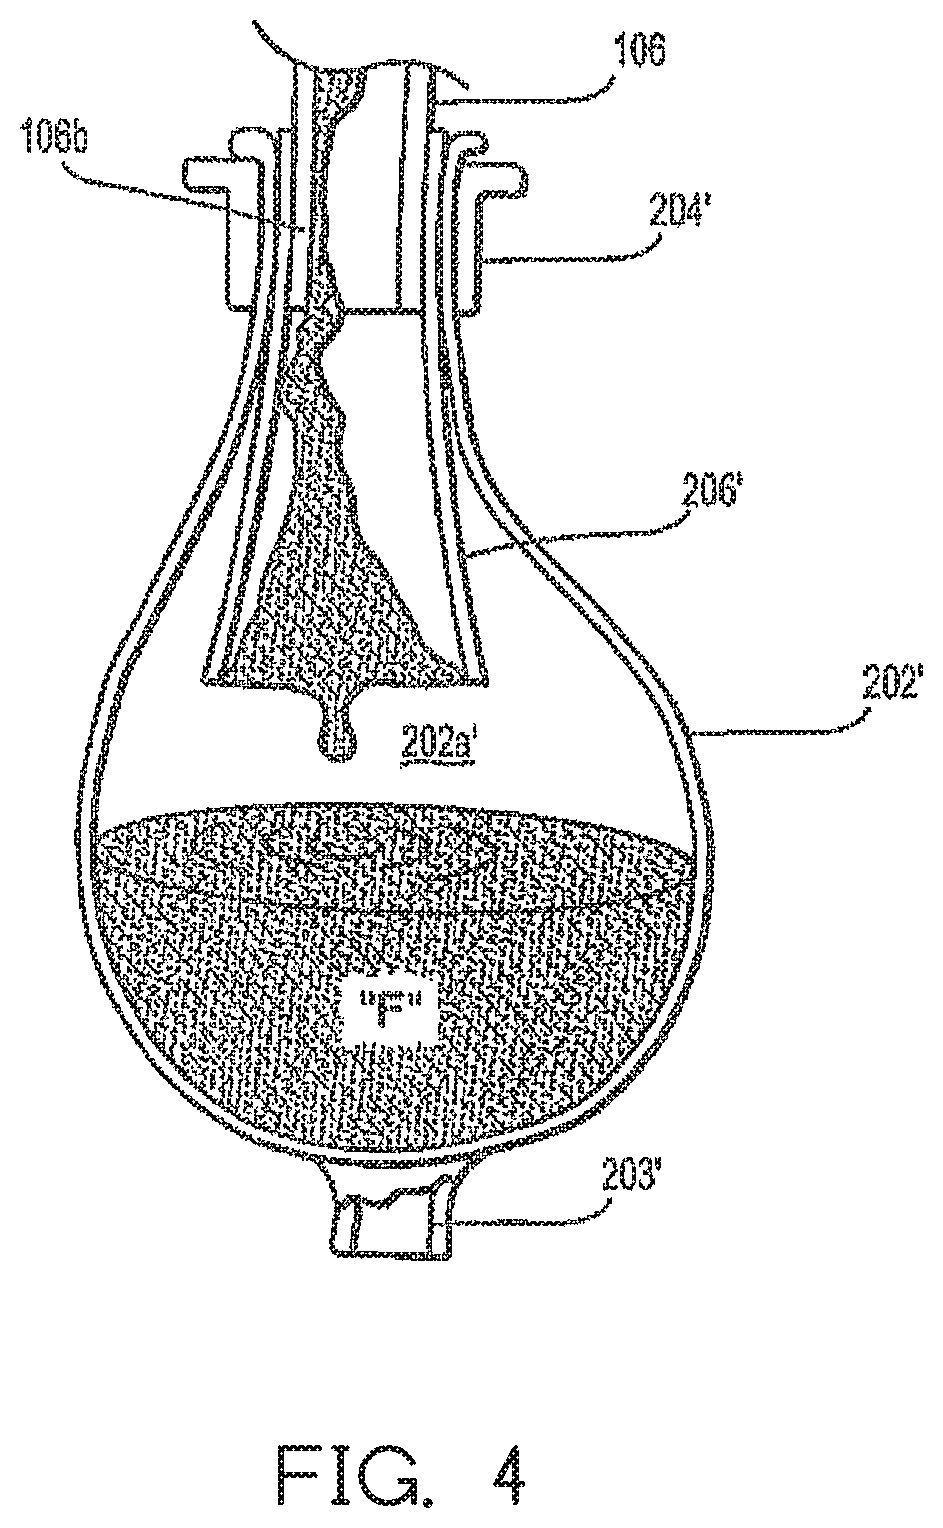 Wound therapy system with related methods therefor